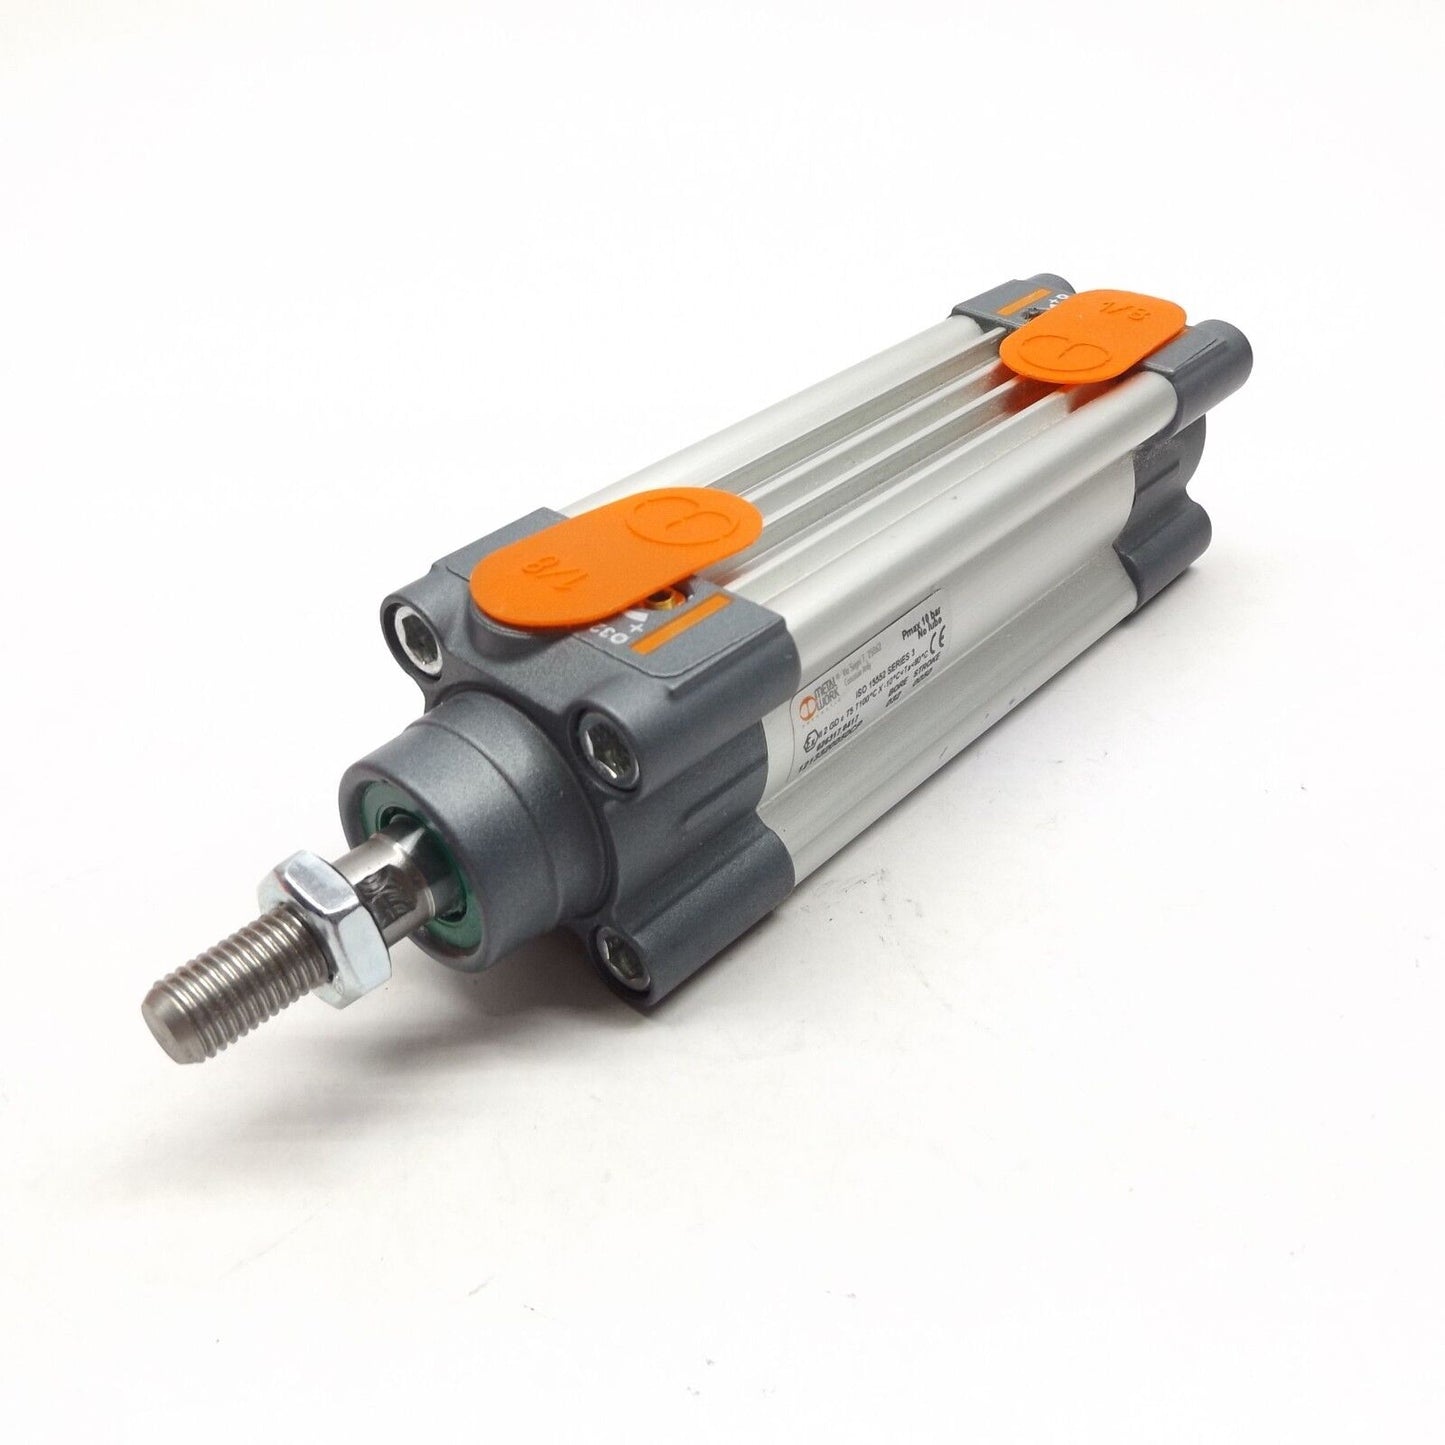 METAL WORK 1213320050CP ISO 15552 SERIES PNEUMATIC CYLINDER